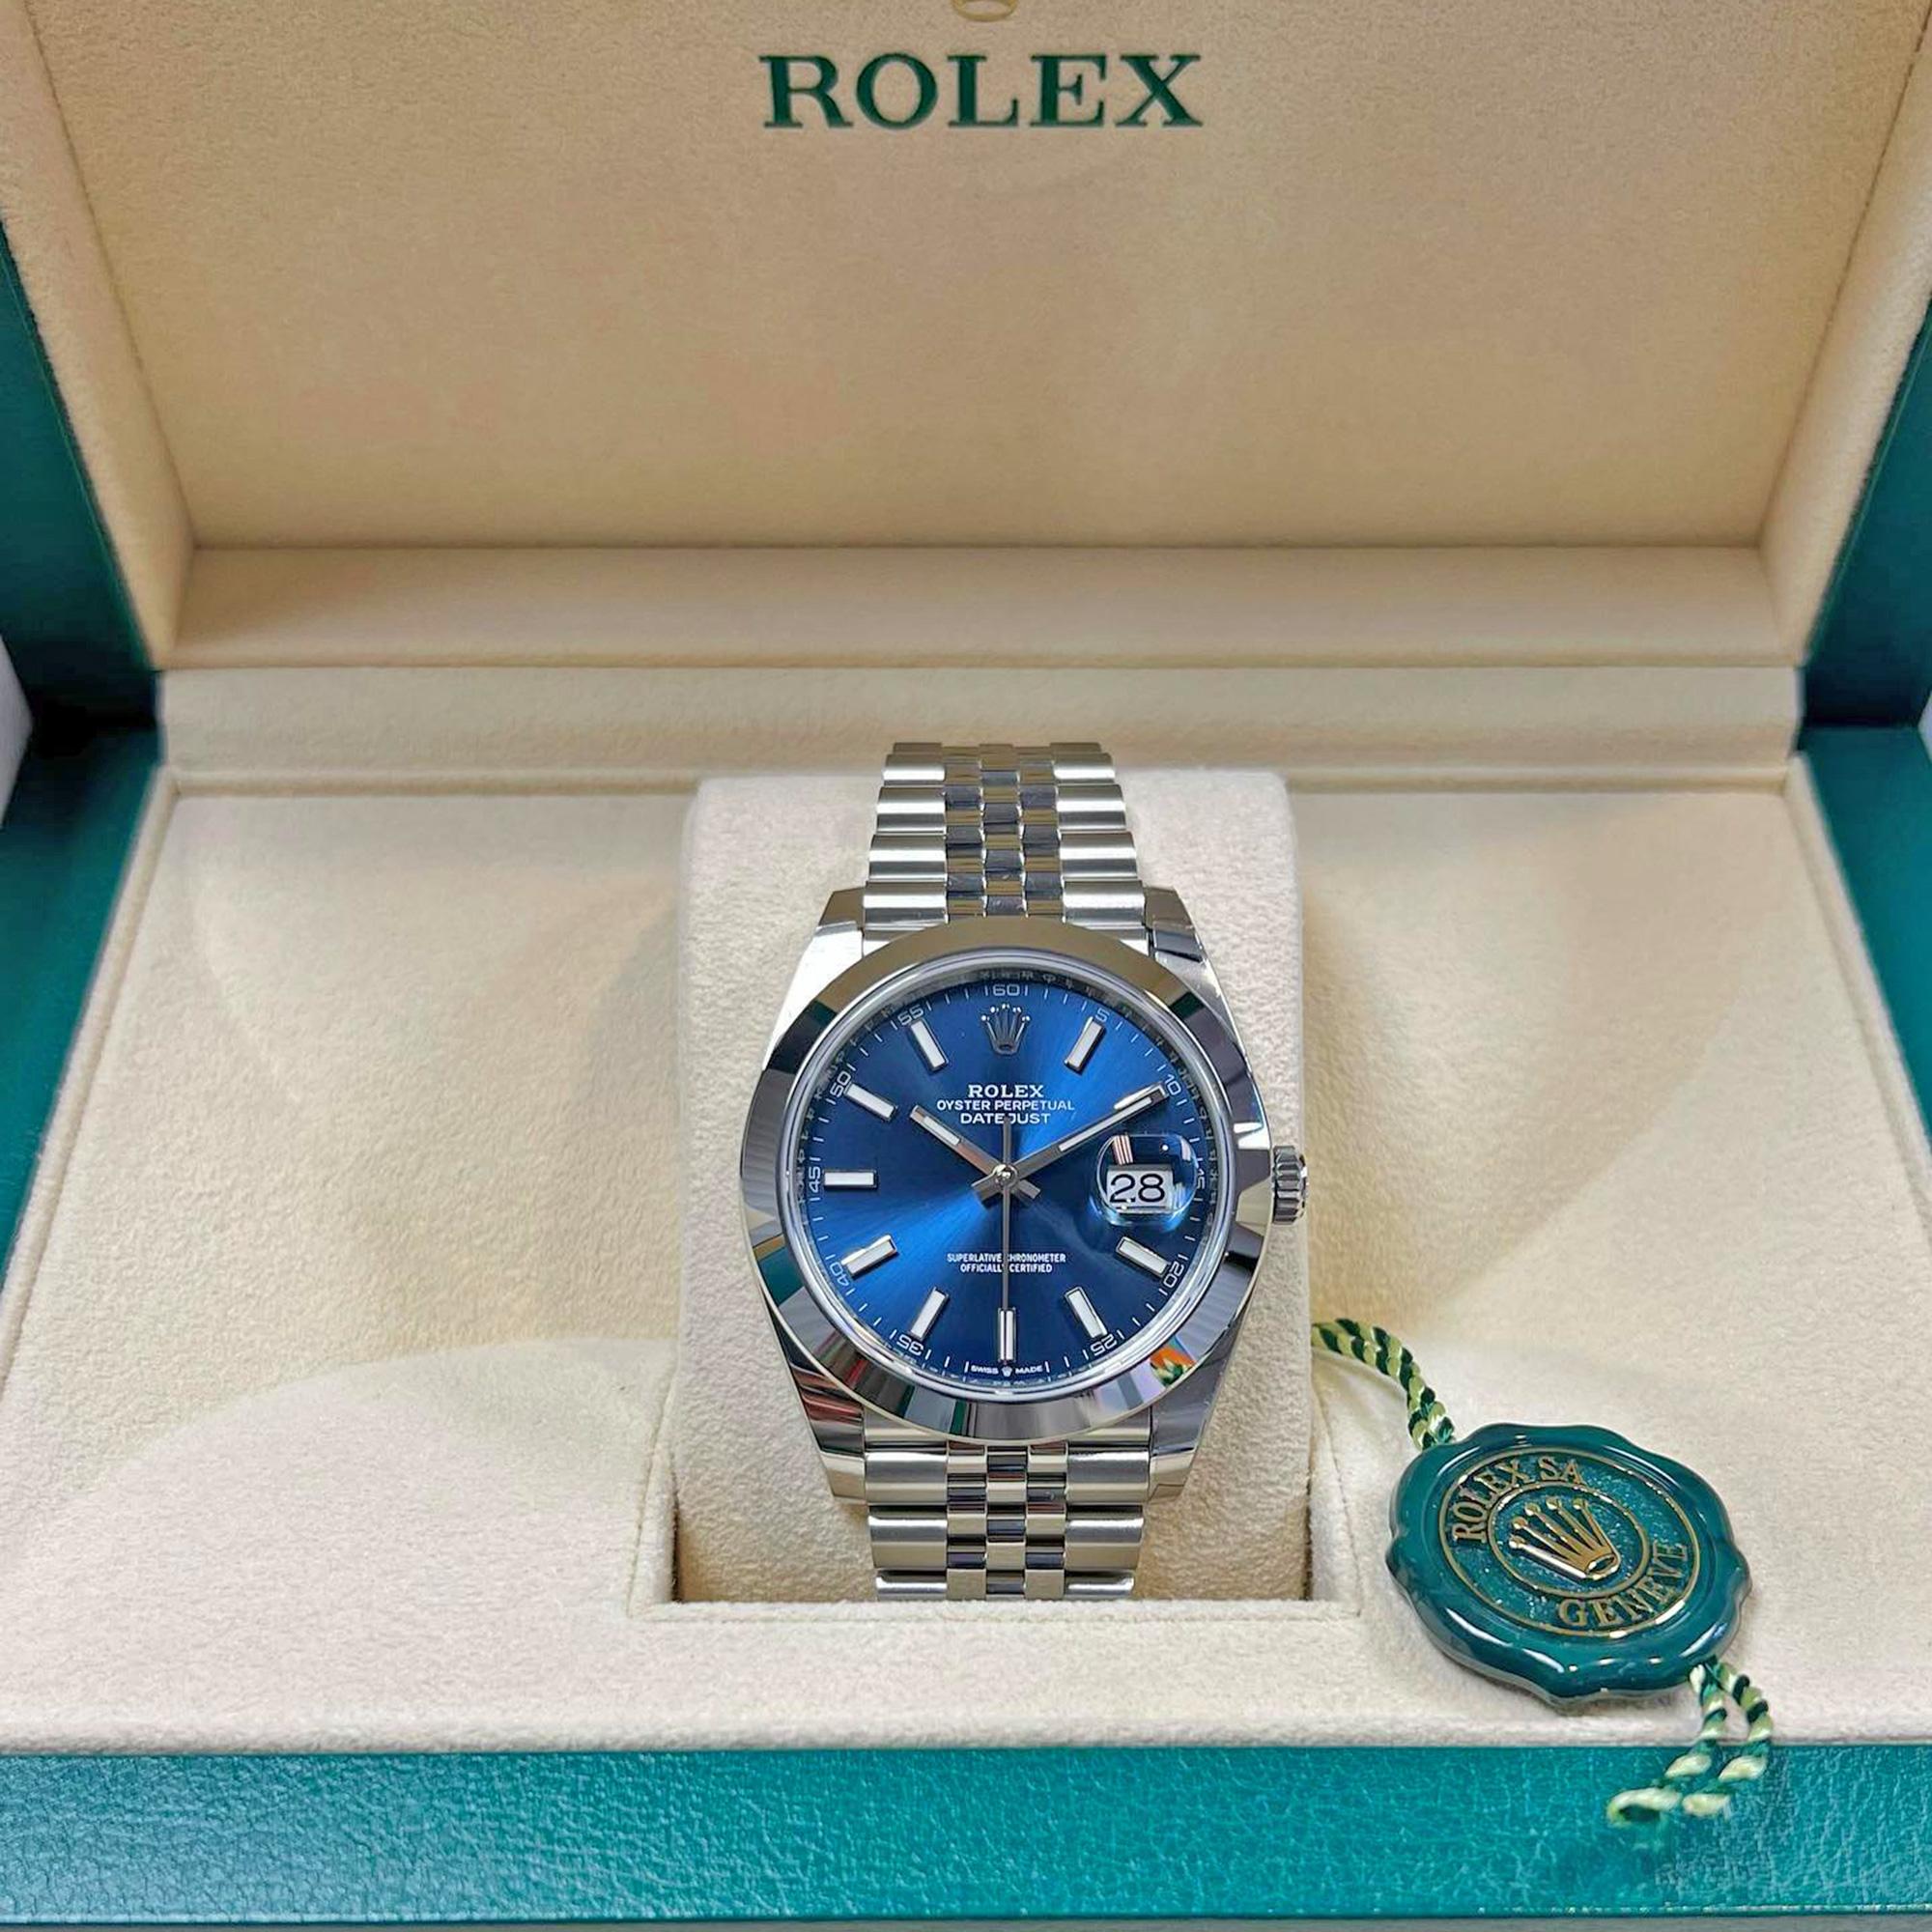 Rolex Datejust 41 watch with polished Stainless Steel case, Reference 126300-0002. This model has Bright blue dial with a fine sunray and highly legible Chromalight display with long-lasting blue luminescence. The dial is adorned with polished hands